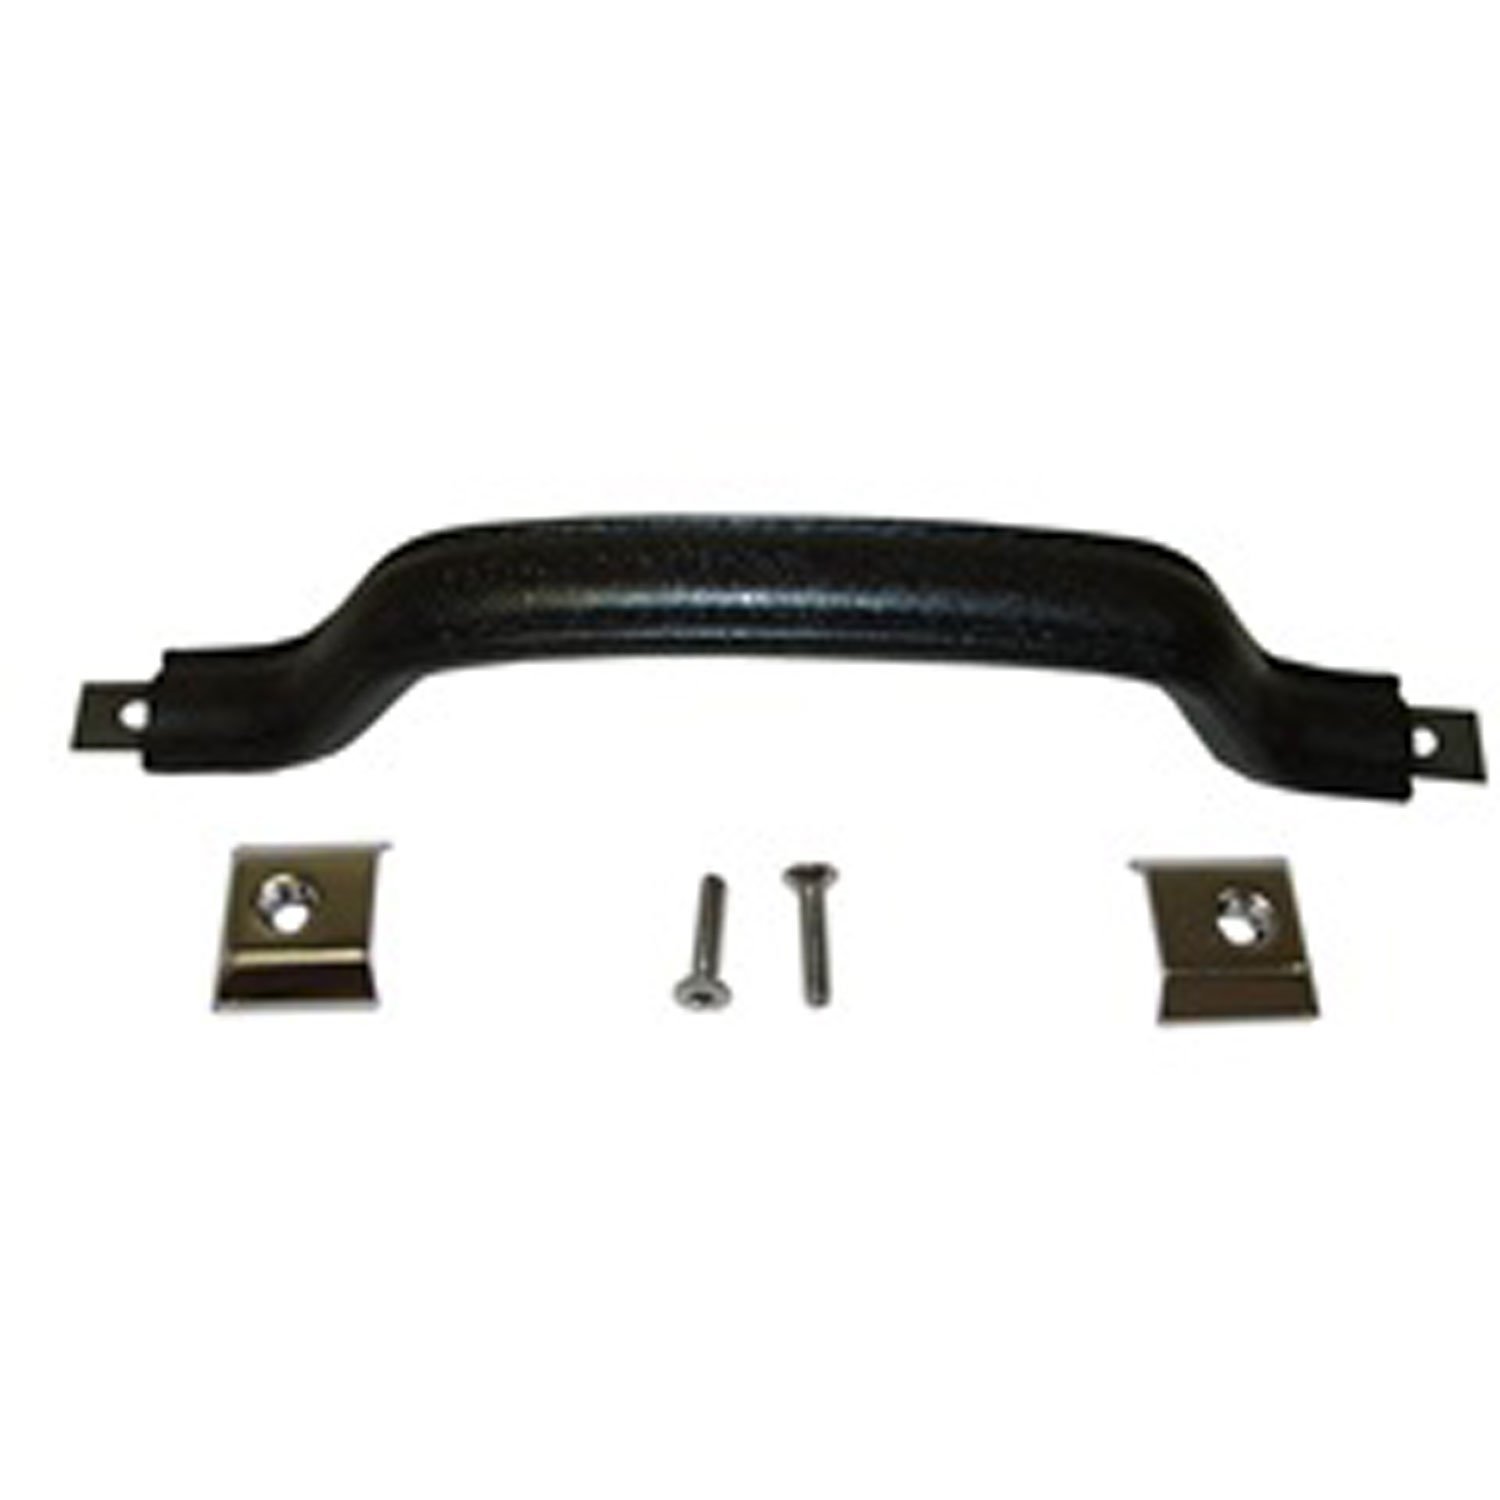 This black interior door pull kit from Omix-ADA